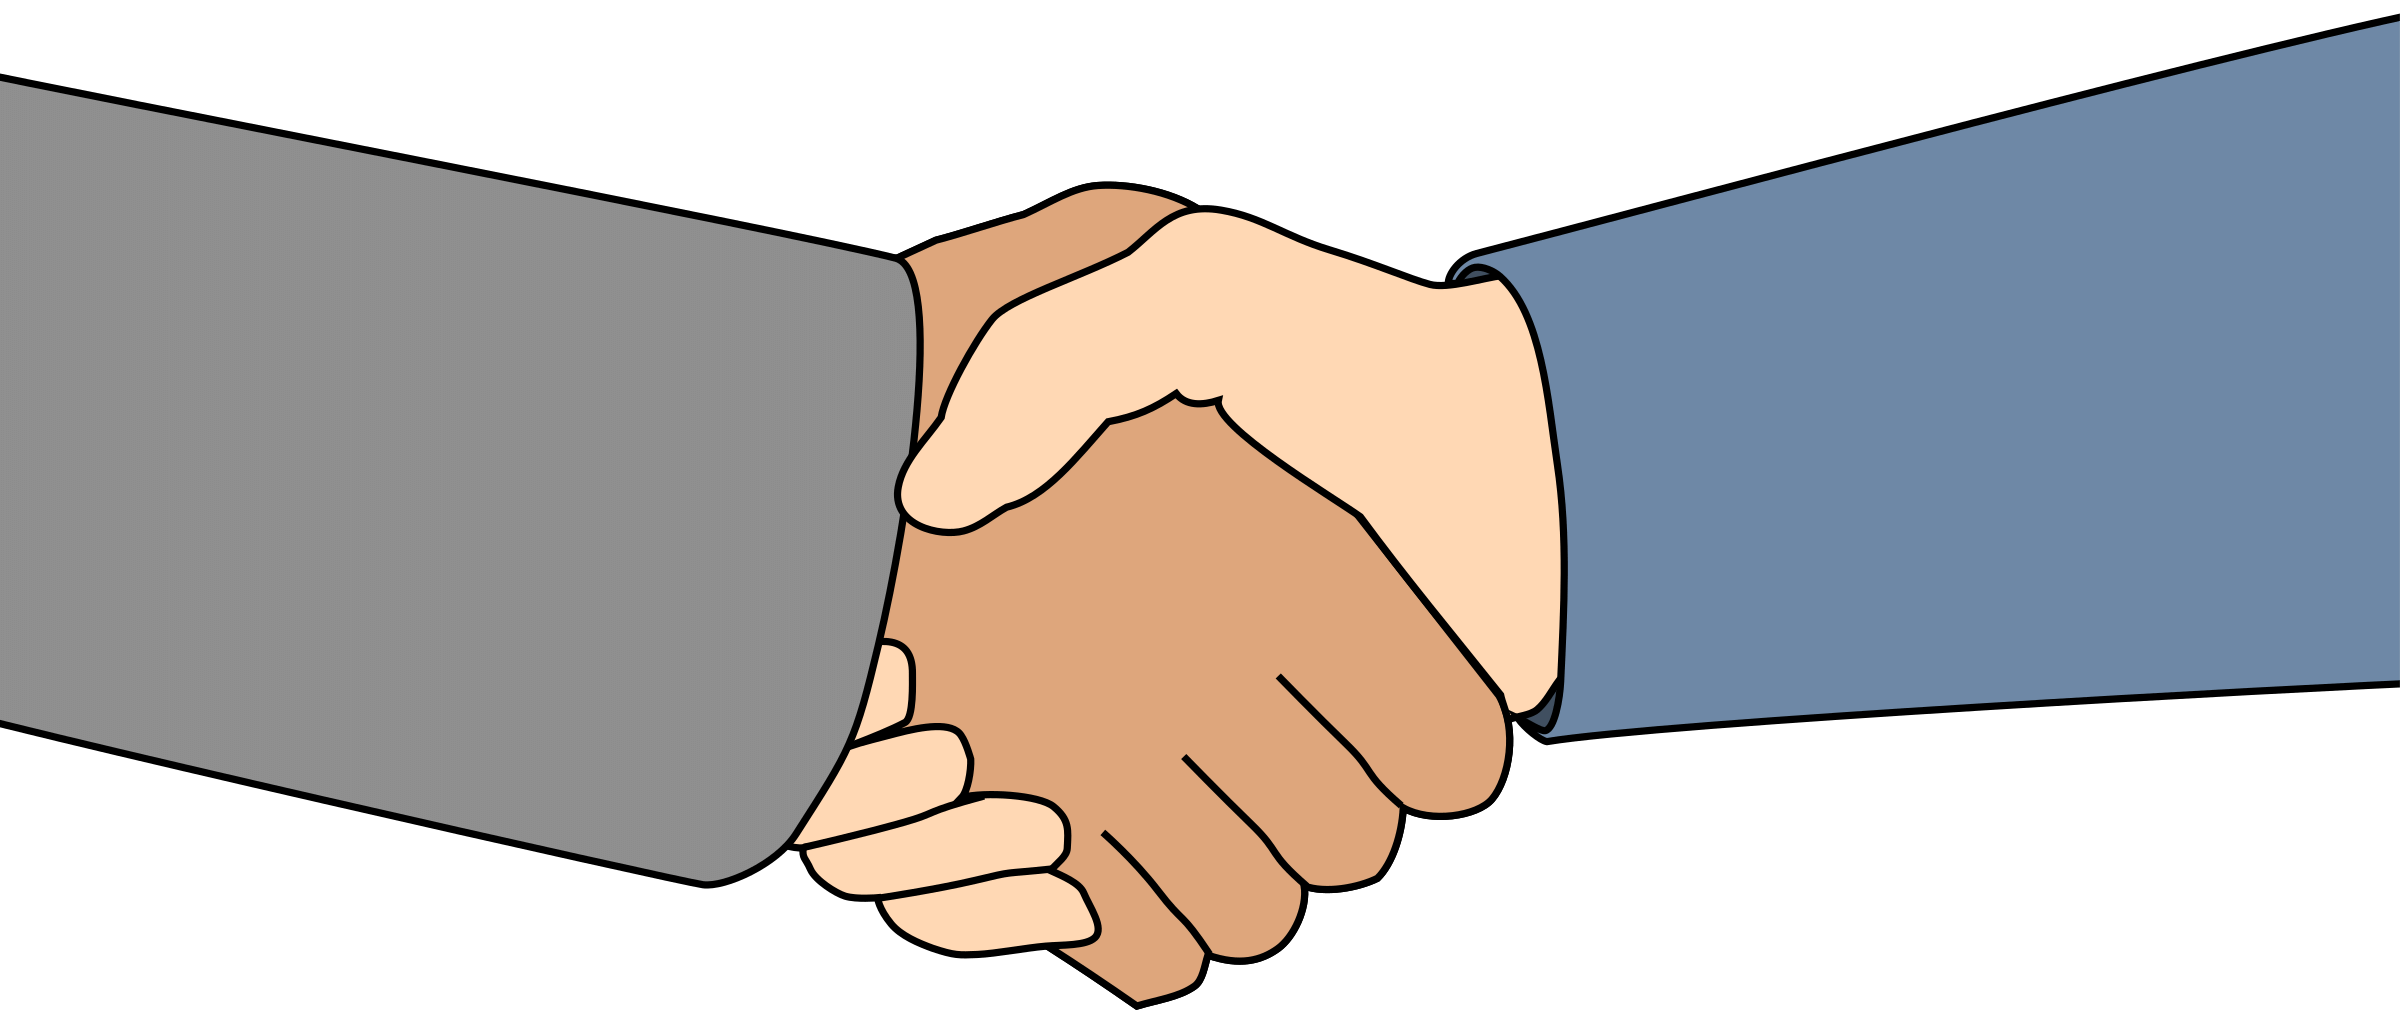 Student shake hands clipart